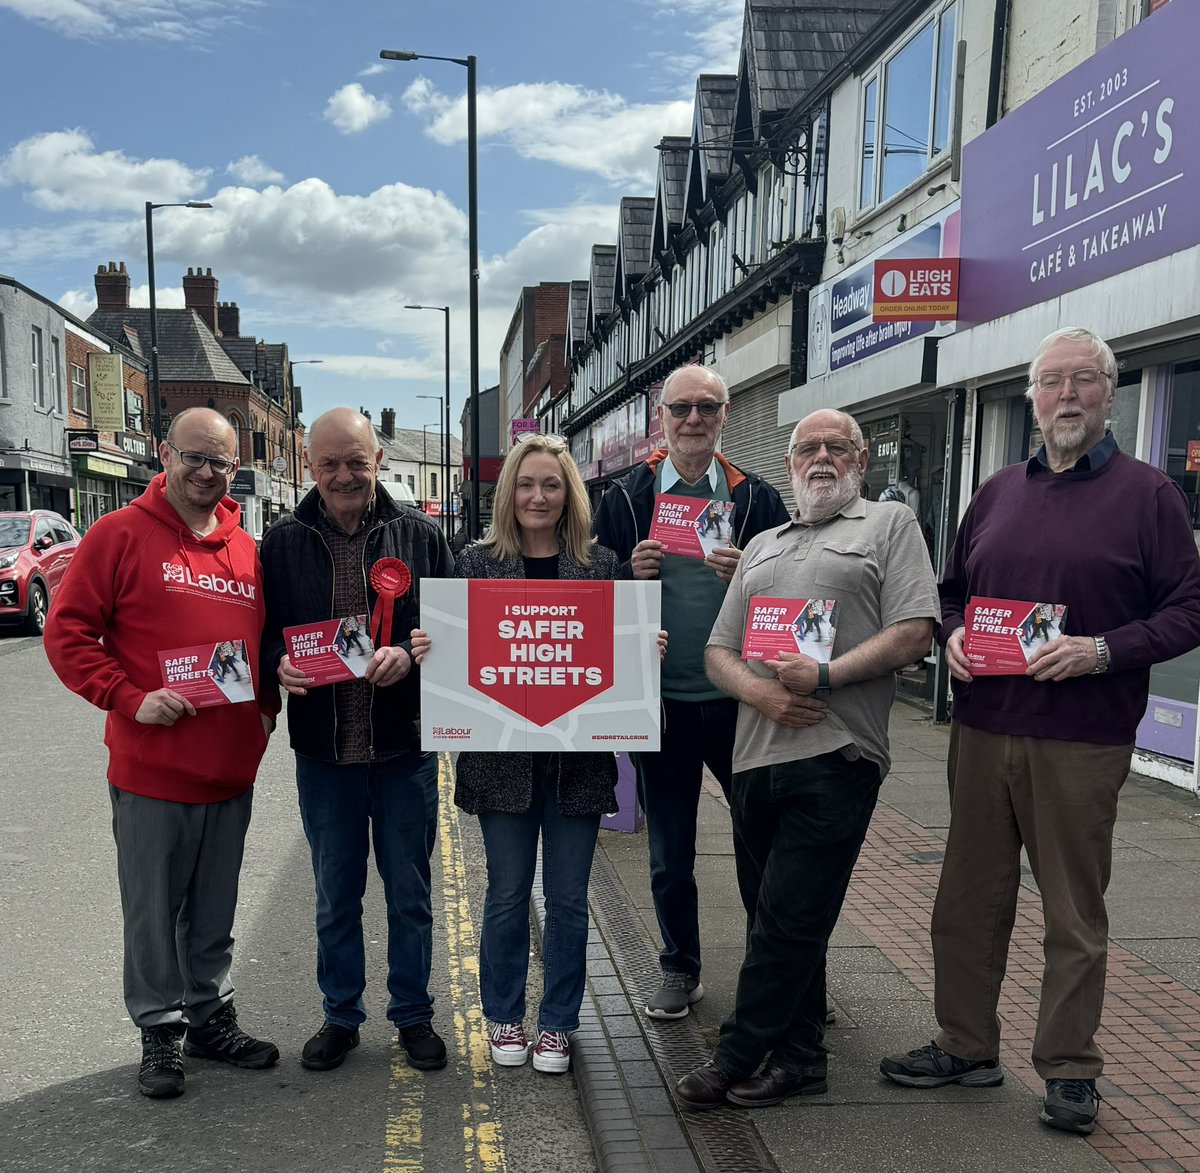 We’ve been out in Leigh town centre this morning talking about @UKLabour and @CoopParty plans to make our high streets and our communities safer for all.

#SaferHighStreets #EndRetailCrime 

party.coop/campaign/retai…